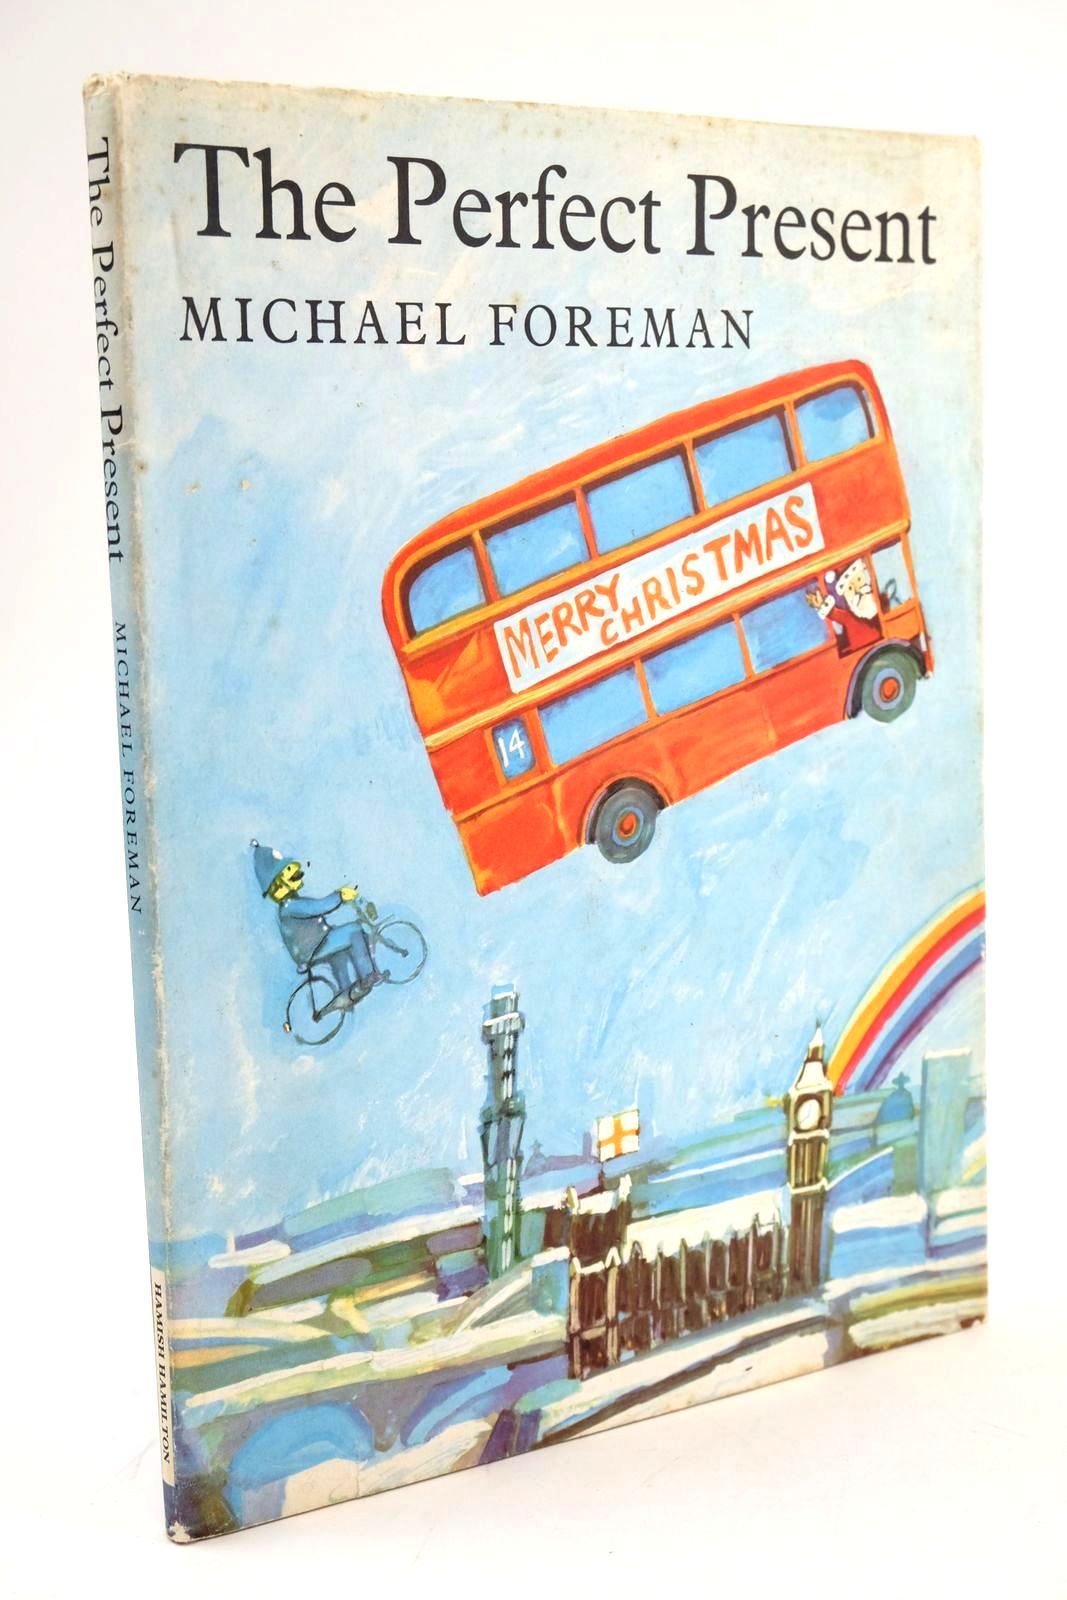 Photo of THE PERFECT PRESENT written by Foreman, Michael illustrated by Foreman, Michael published by Hamish Hamilton (STOCK CODE: 1325054)  for sale by Stella & Rose's Books